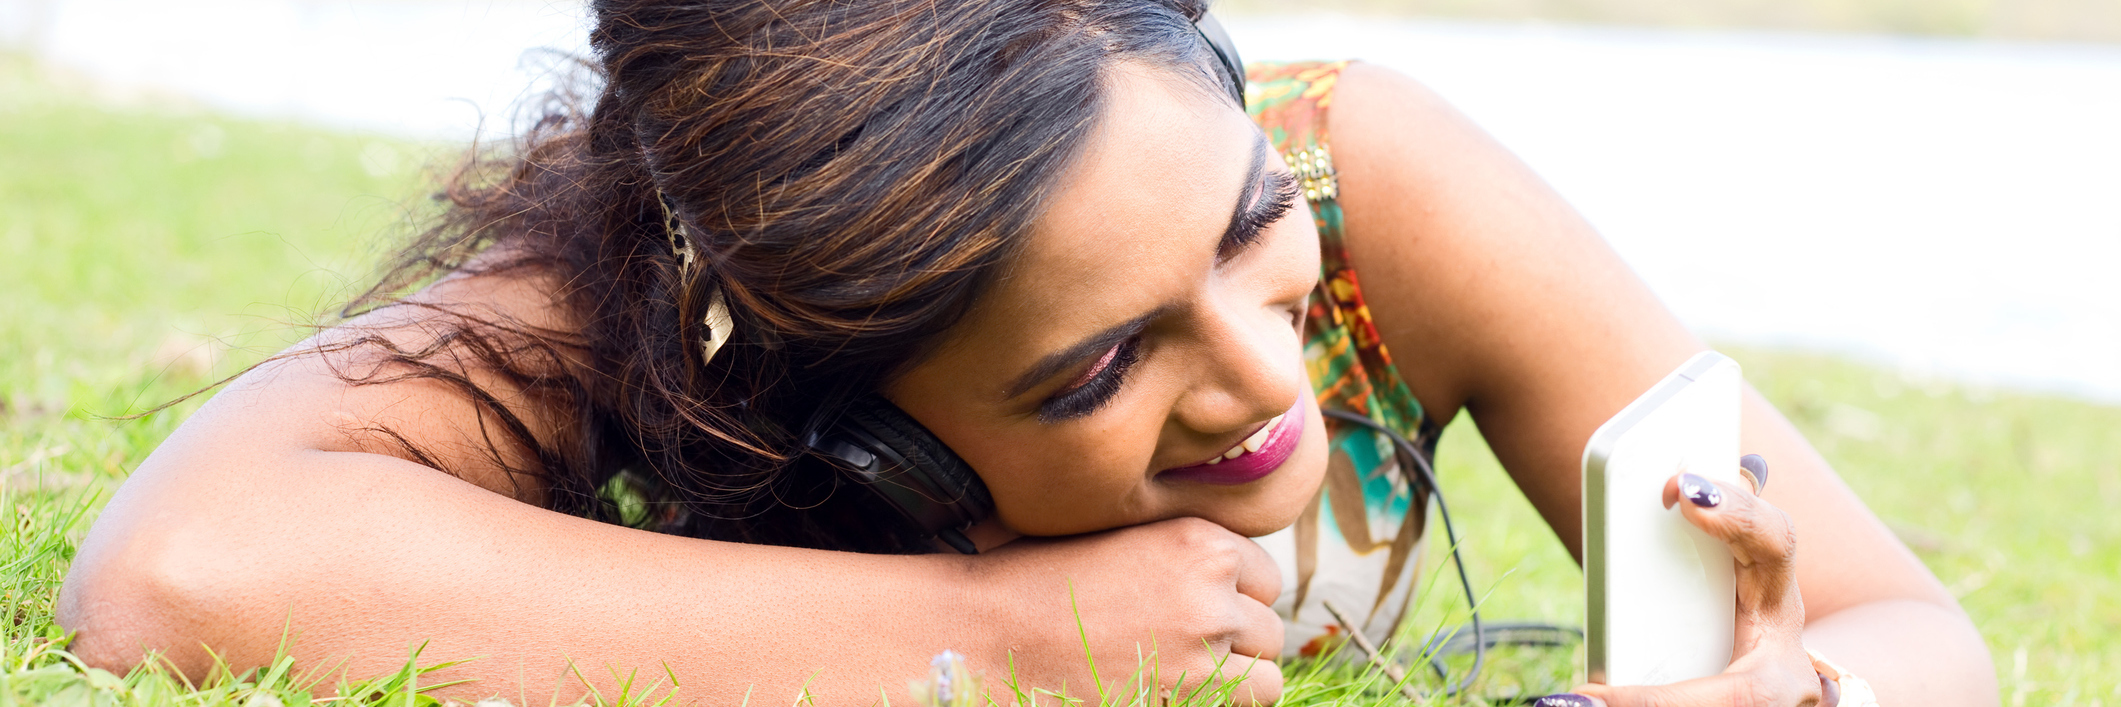 woman lying in the grass and listening to music